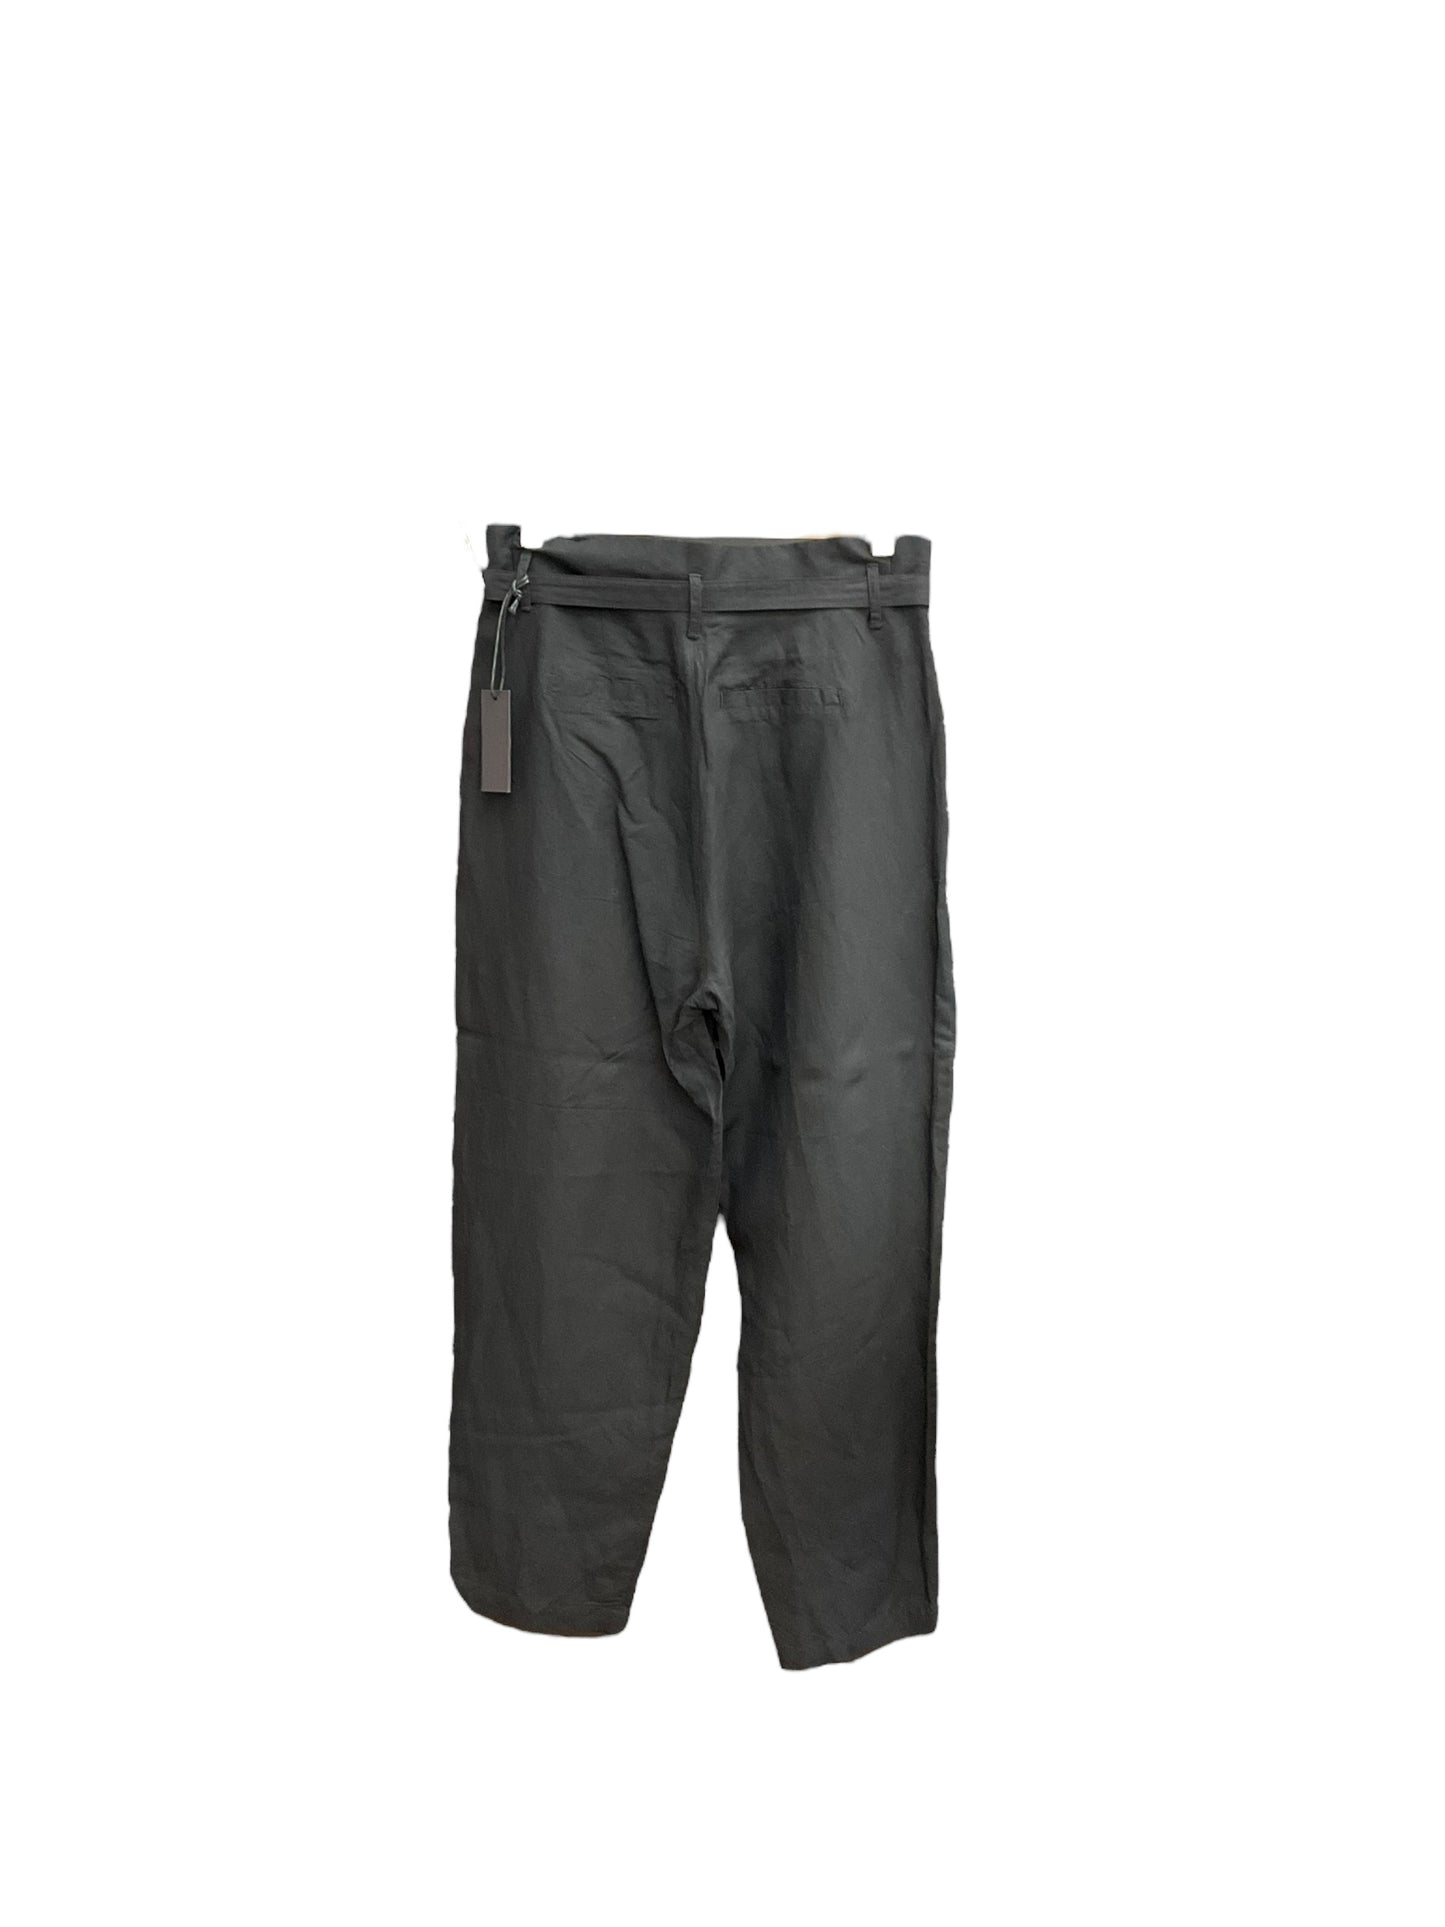 Pants Other By Blanknyc  Size: 6